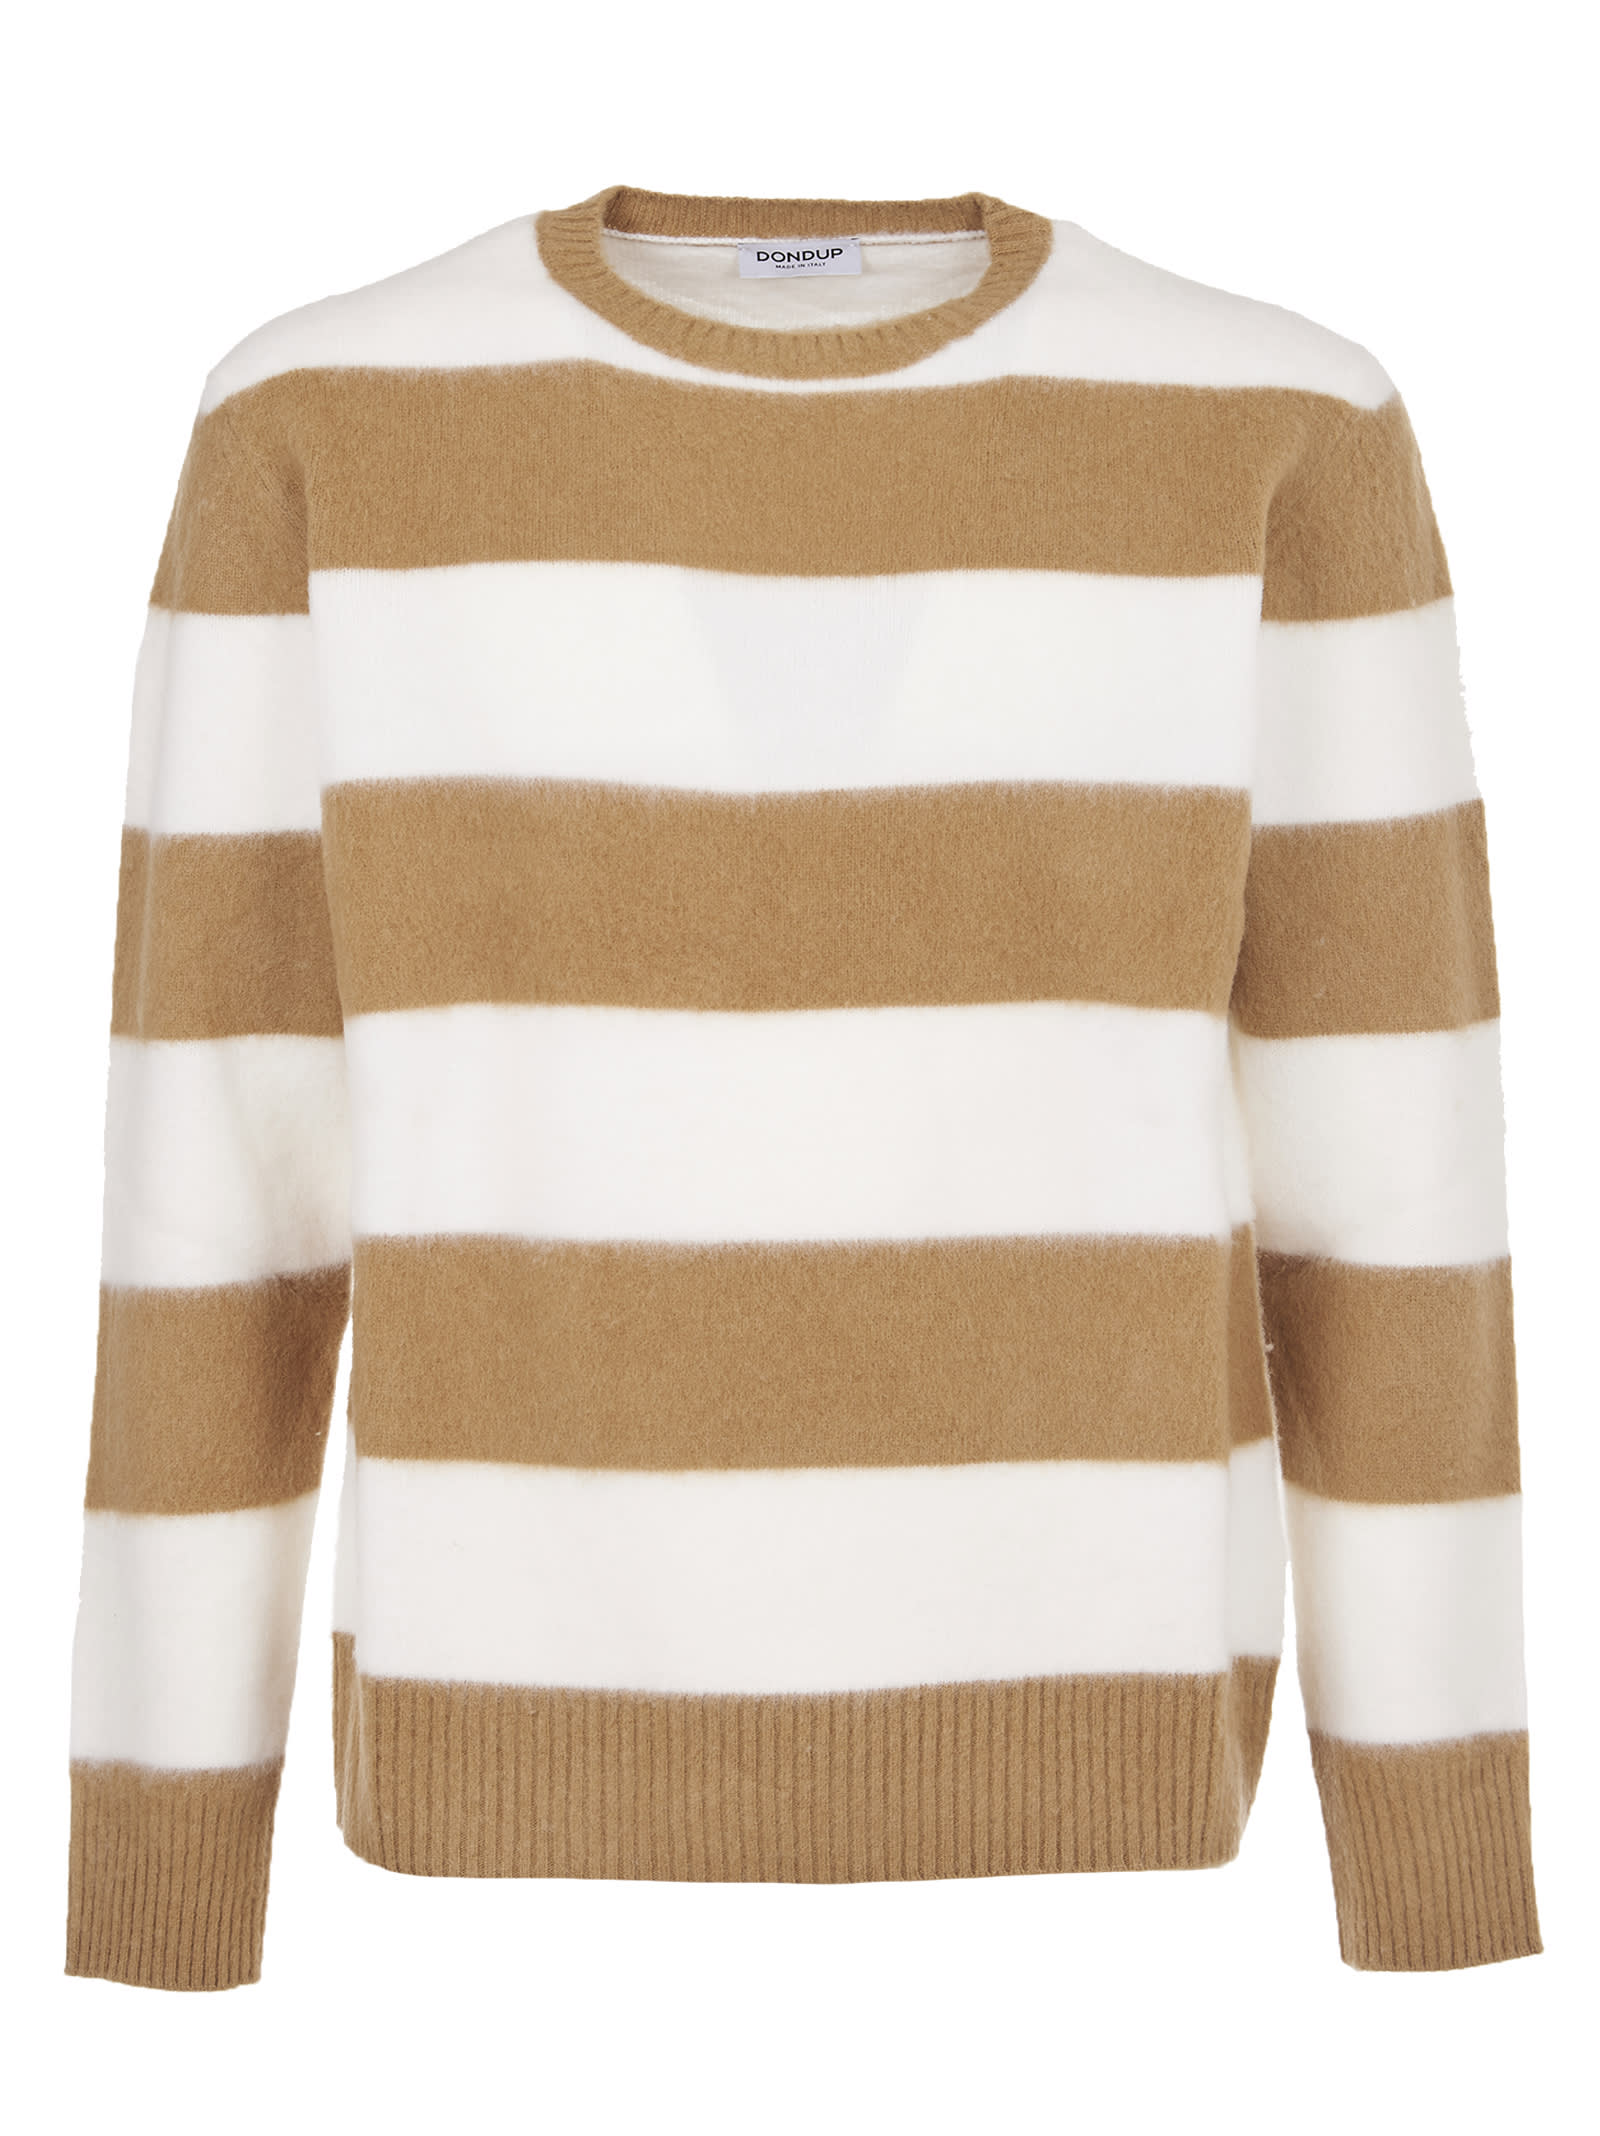 Dondup White And Camel Striped Sweater